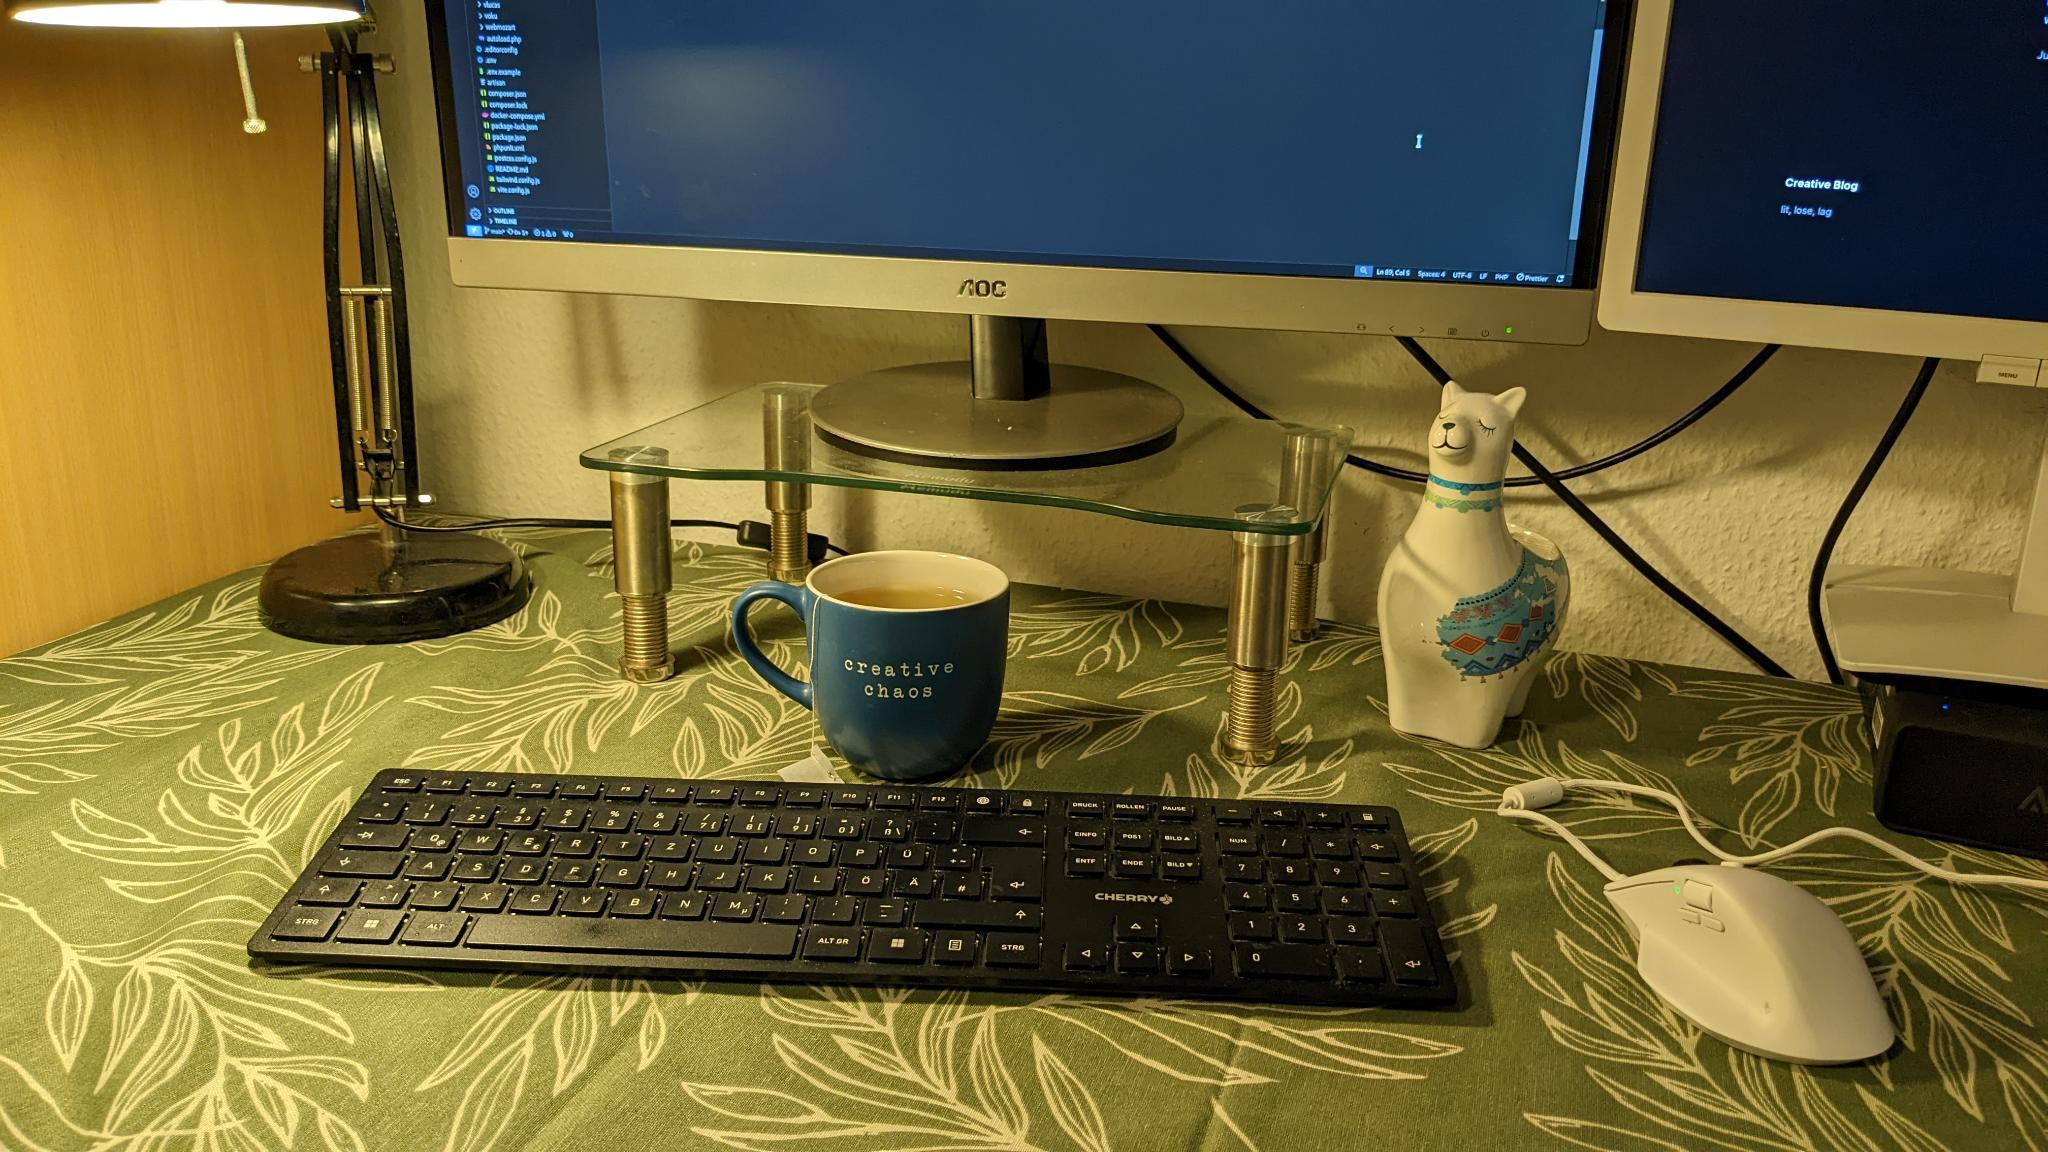 Image of desk with keyboard, mouse, monitors, a cup and imprint "creative chaos" and a cute llama sculpture.